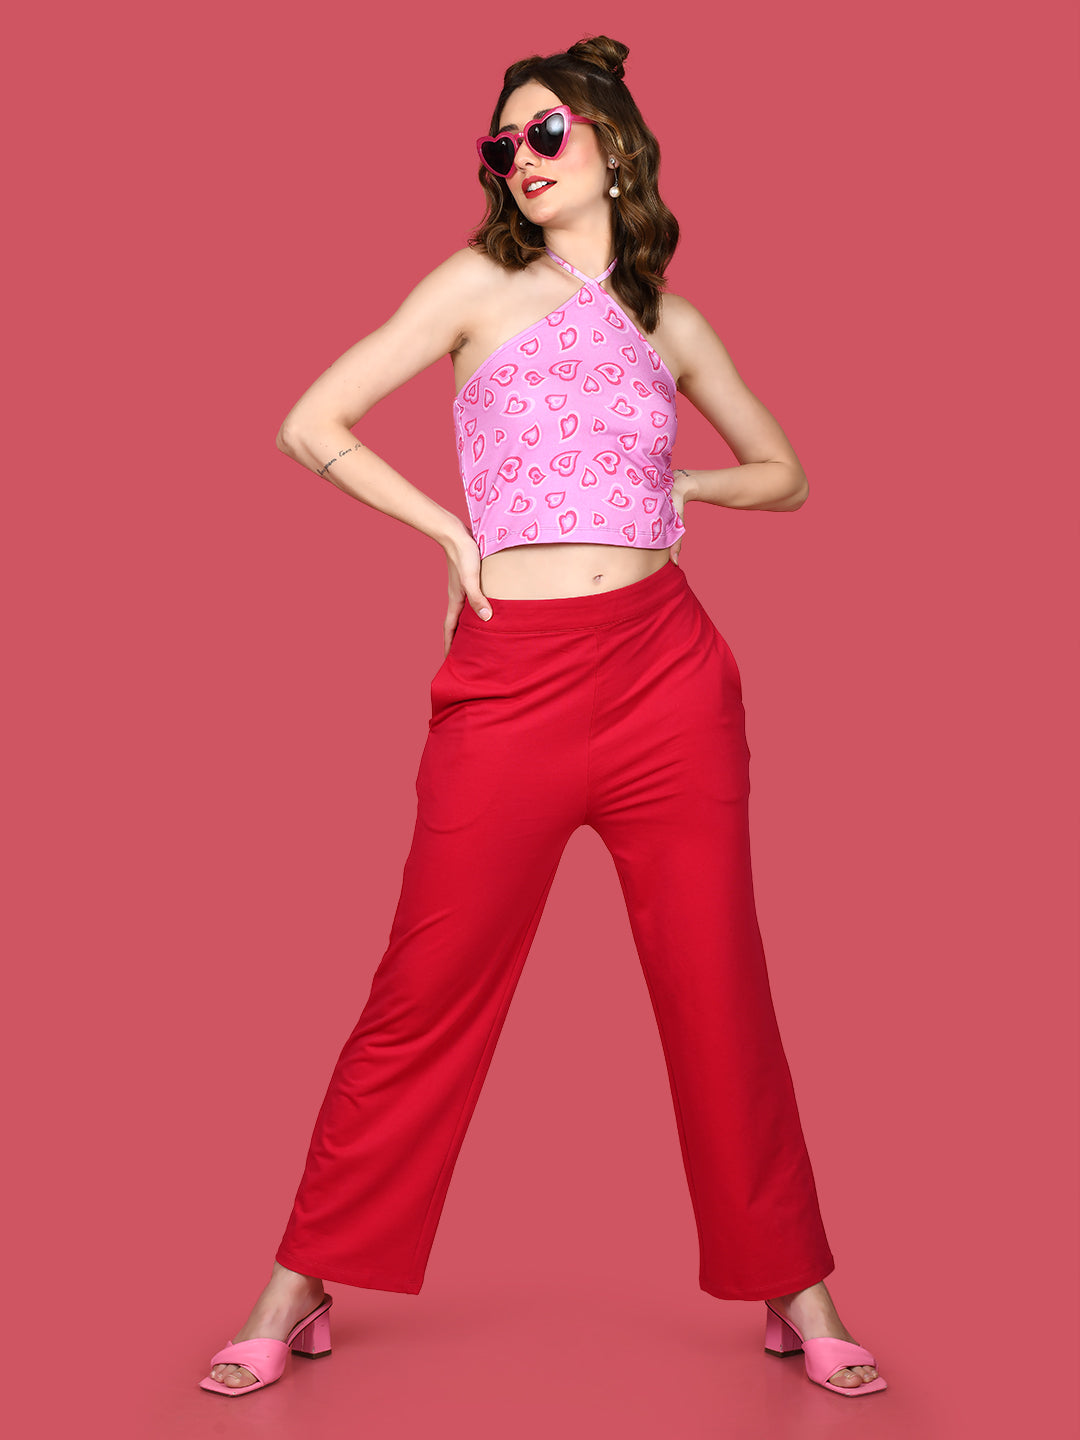 Buy Red Ankle-length Pants Online - W for Woman